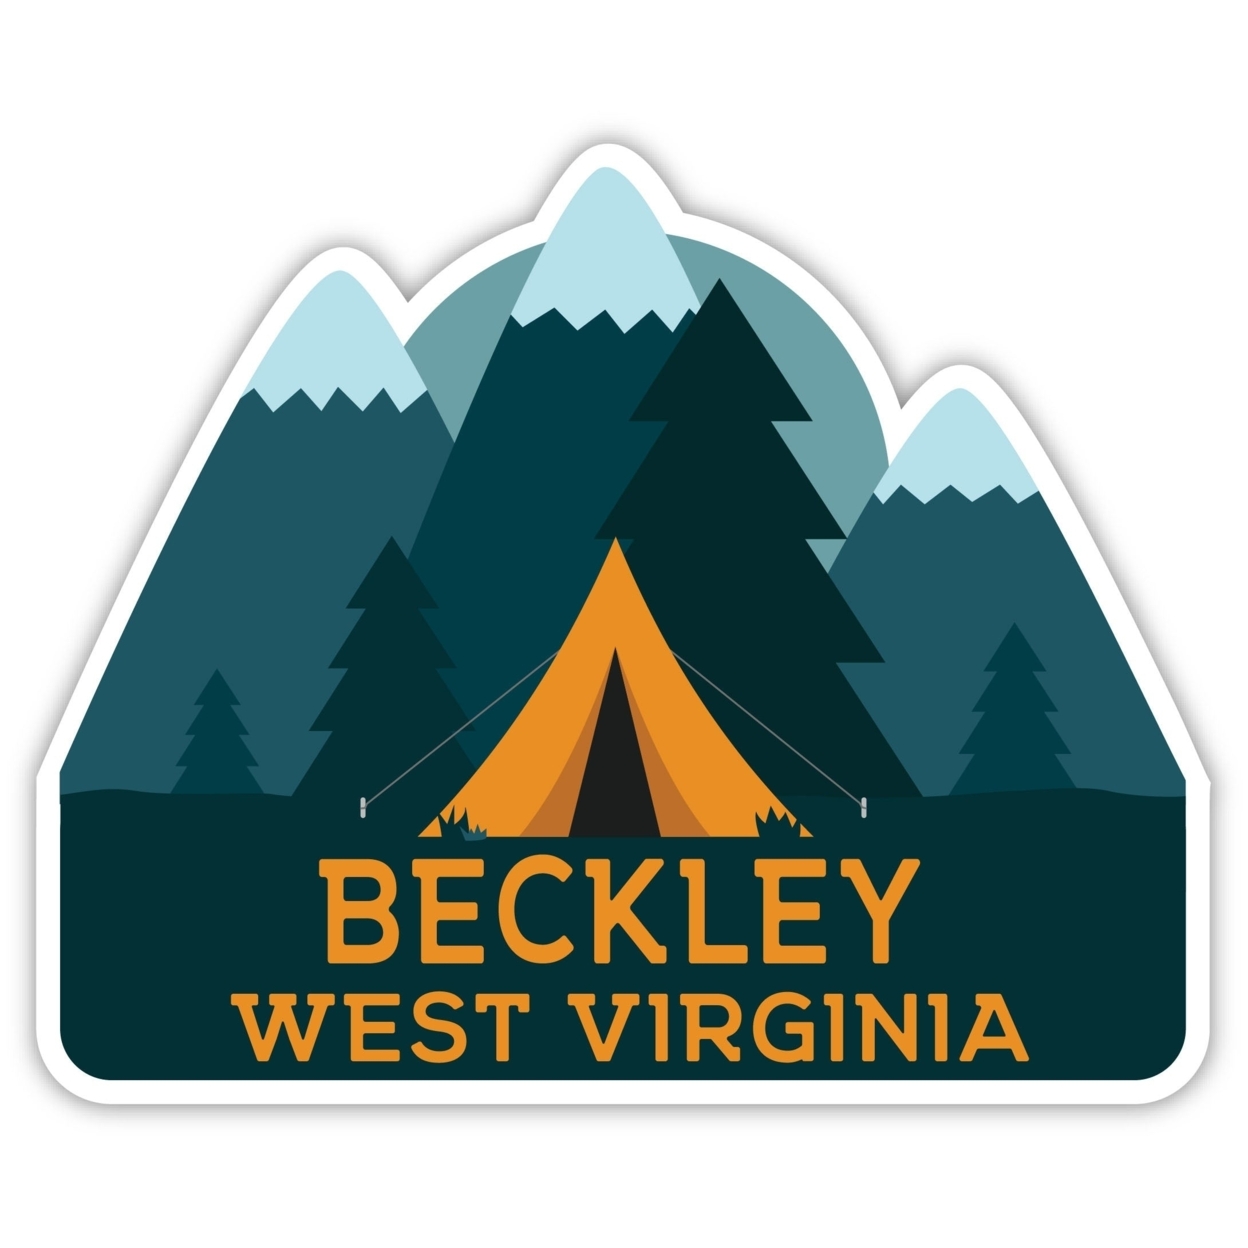 Beckley West Virginia Souvenir Decorative Stickers (Choose Theme And Size) - 4-Pack, 8-Inch, Tent